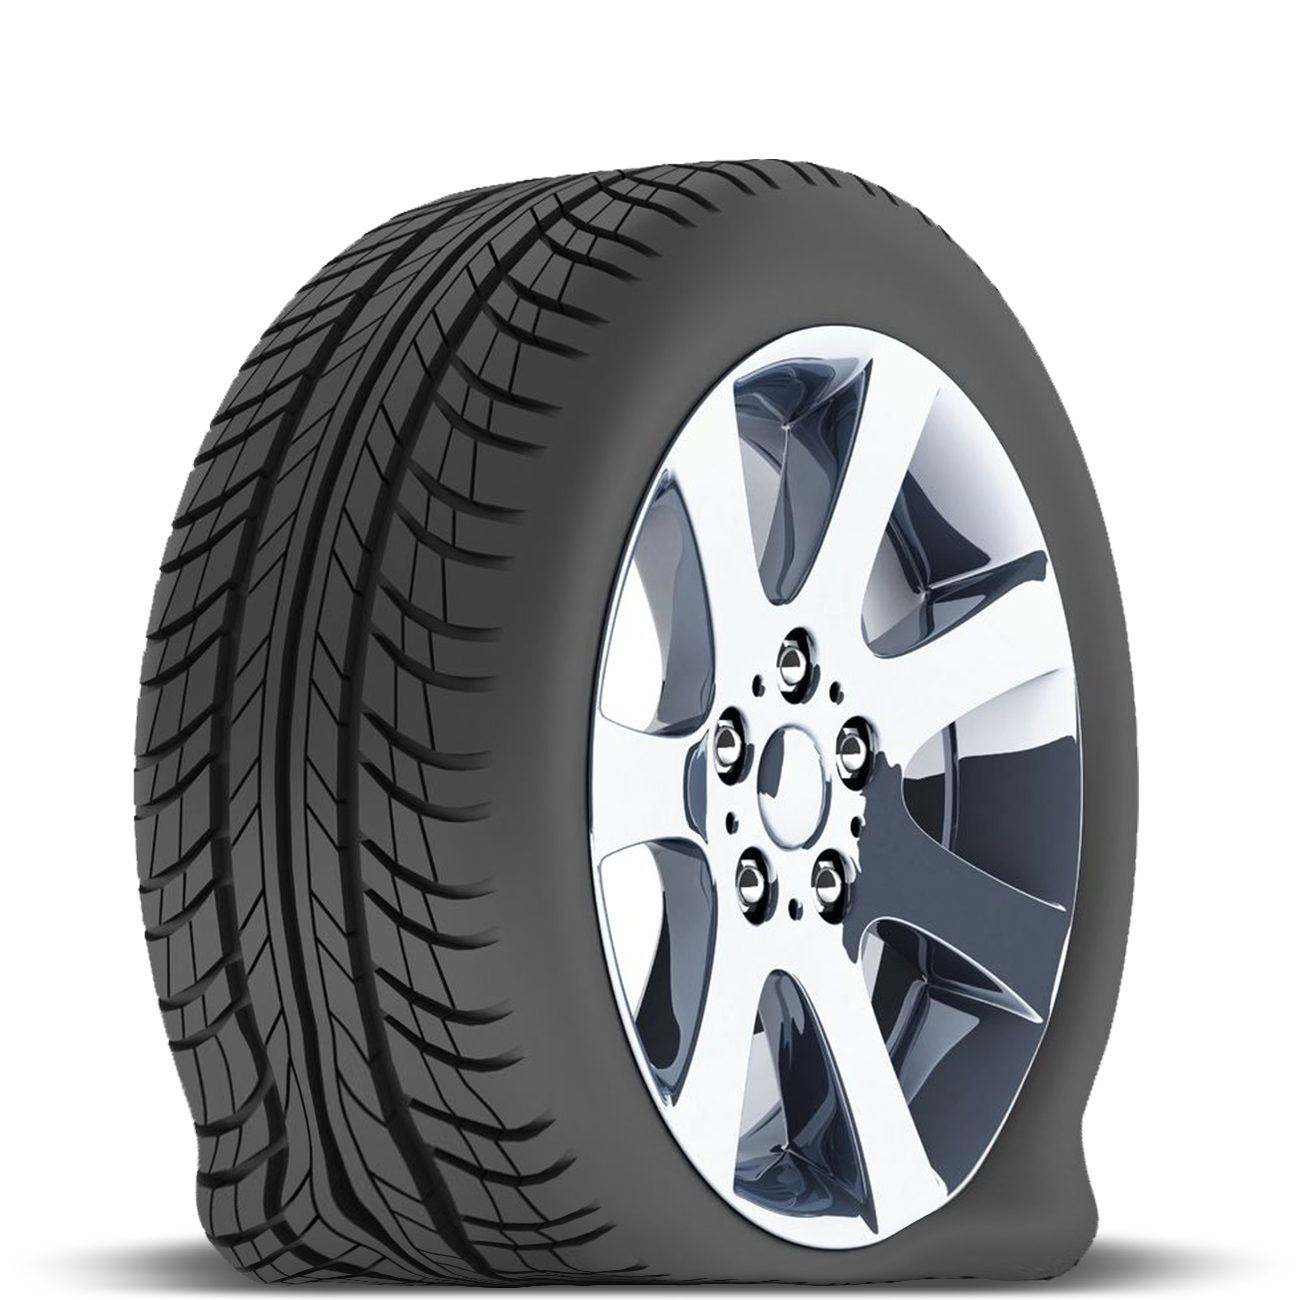 Flat Tyre Png - Flat Tyre Png Hdpng.com 1300, Transparent background PNG HD thumbnail